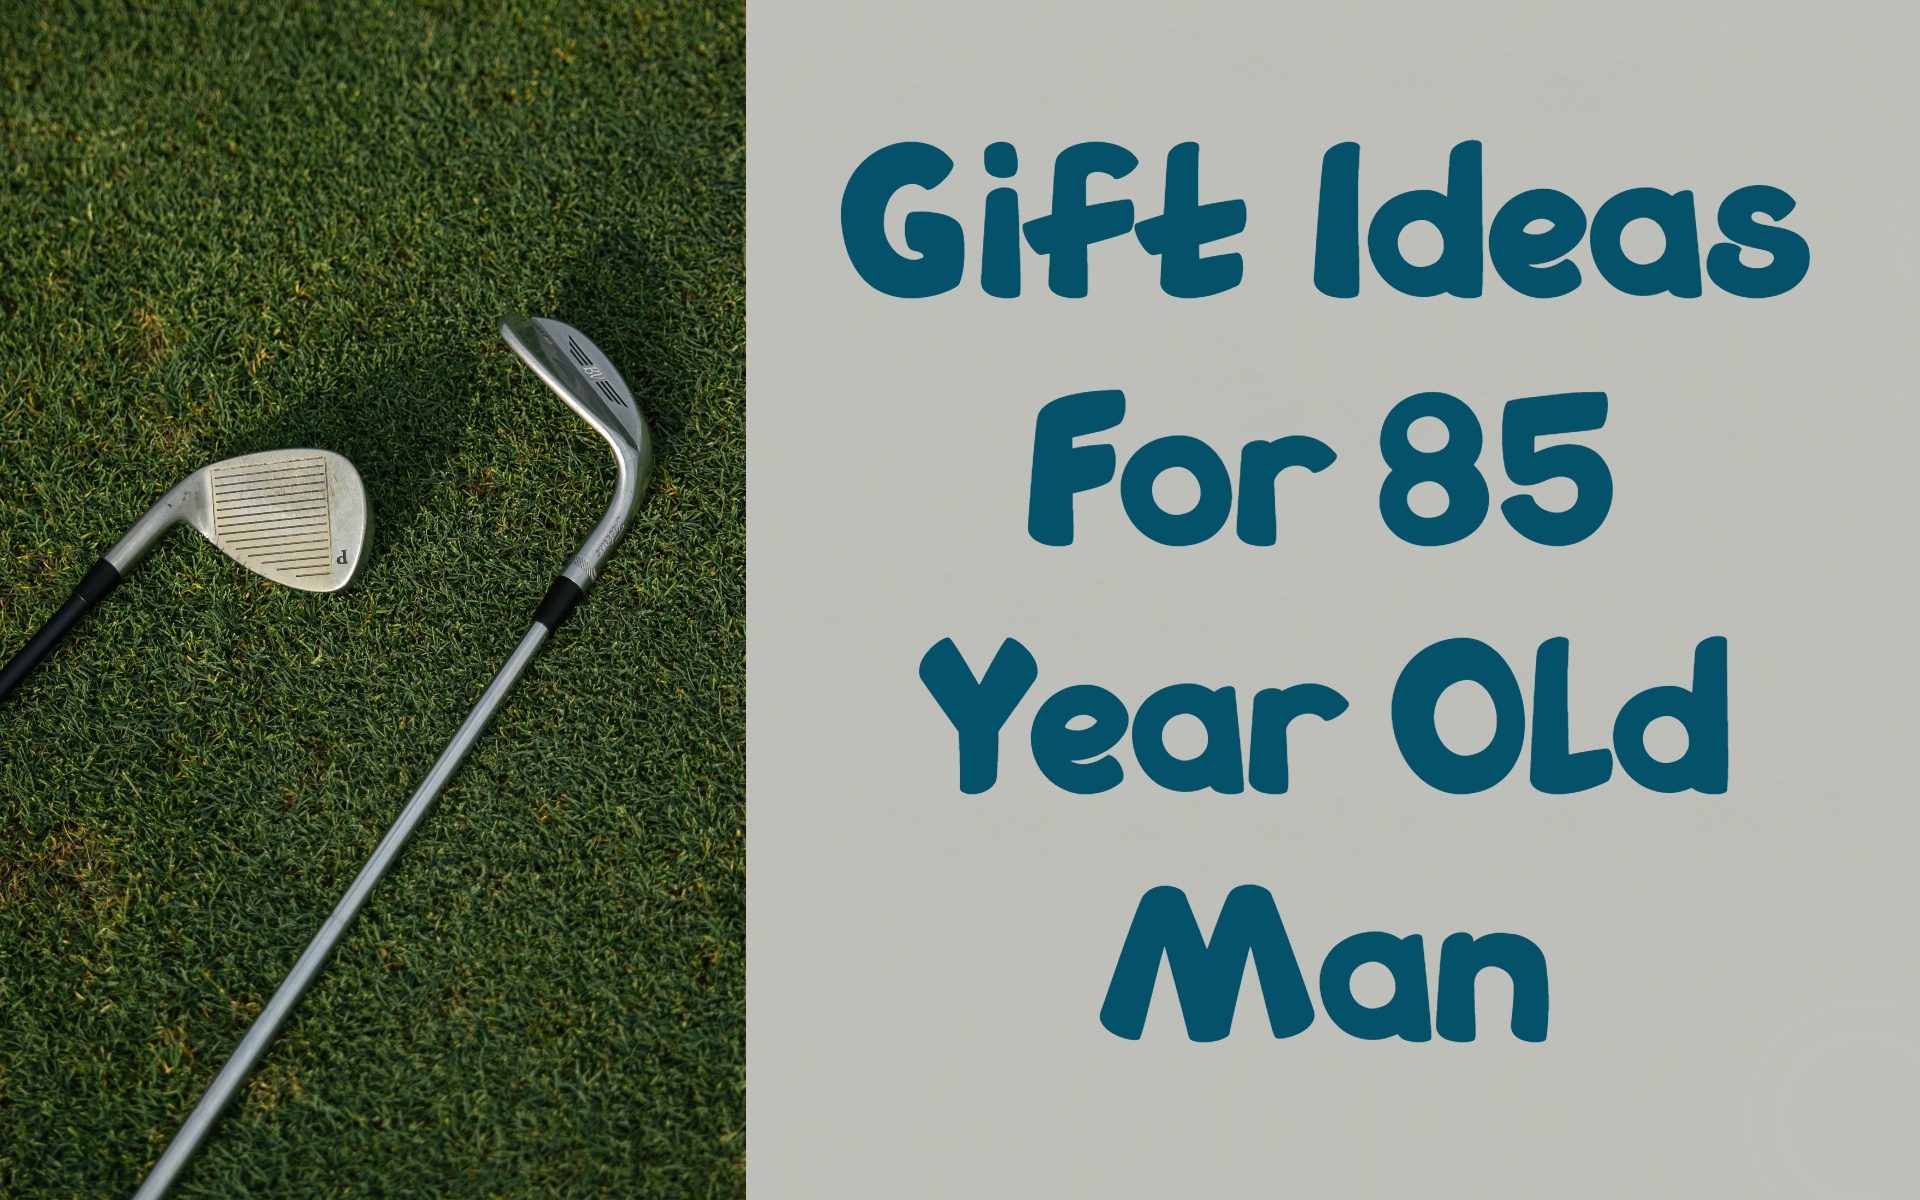 Cover image of gift ideas for 85-year-old man by Giftsedge